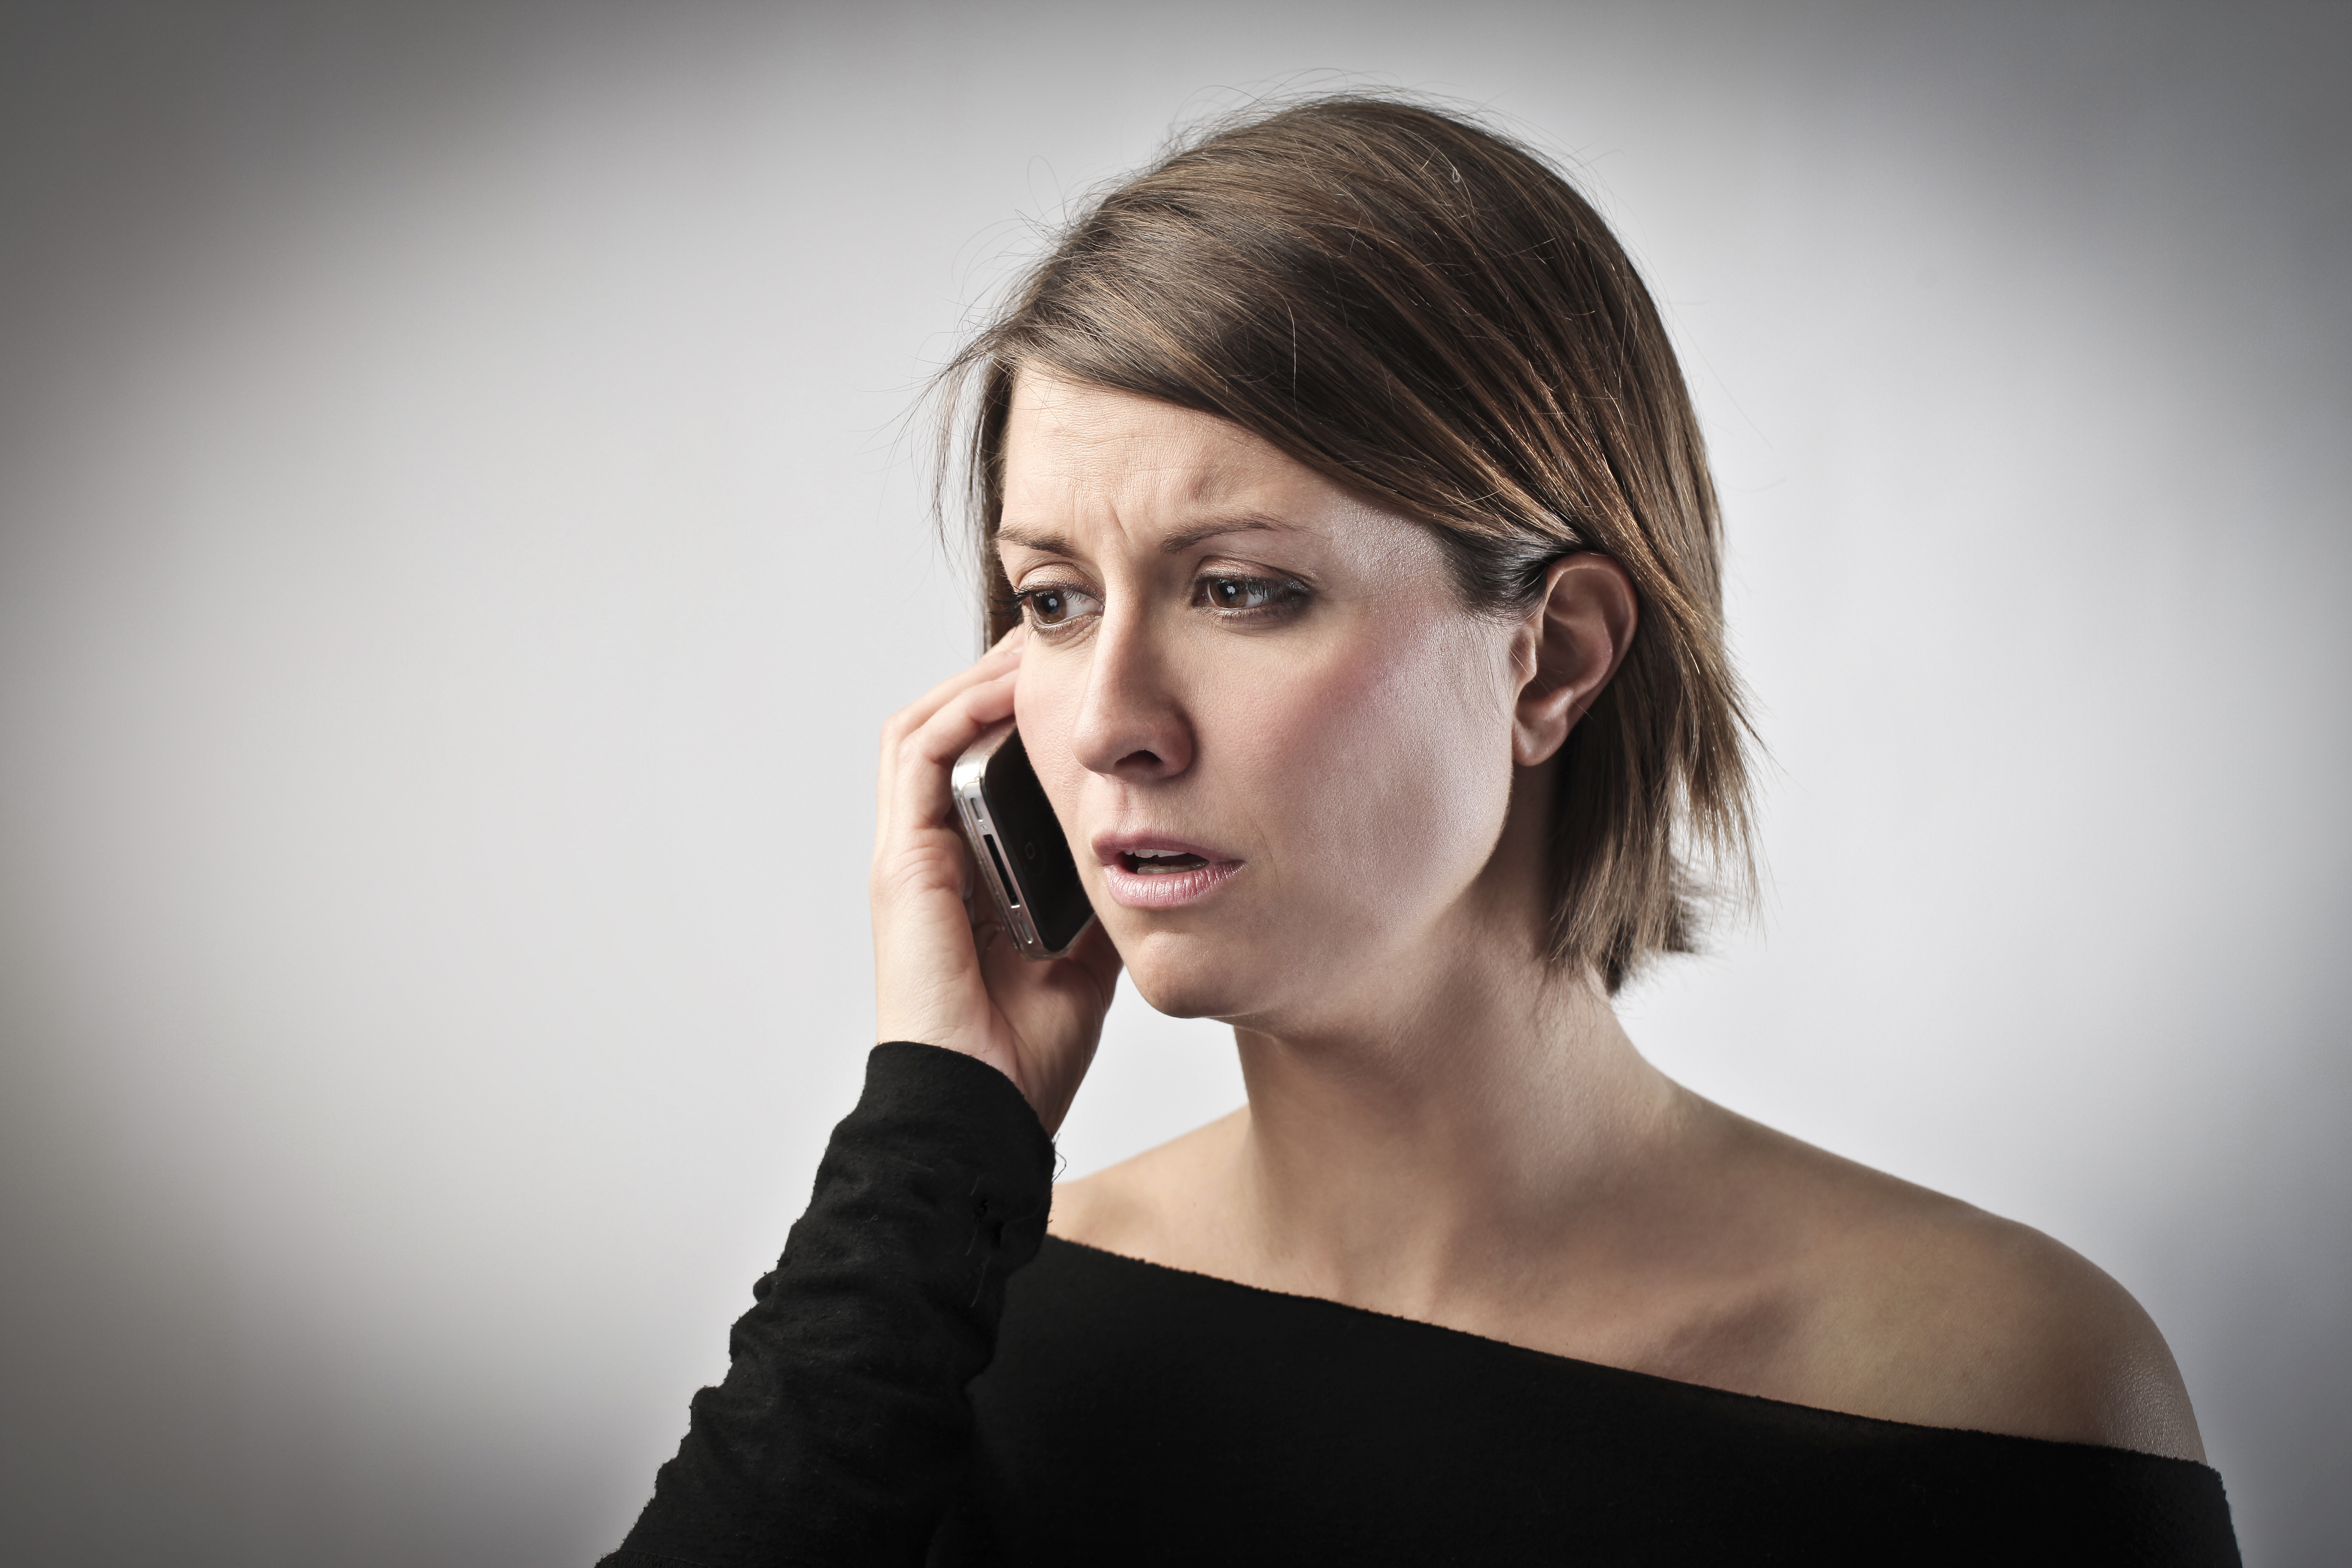 Worried woman on the phone